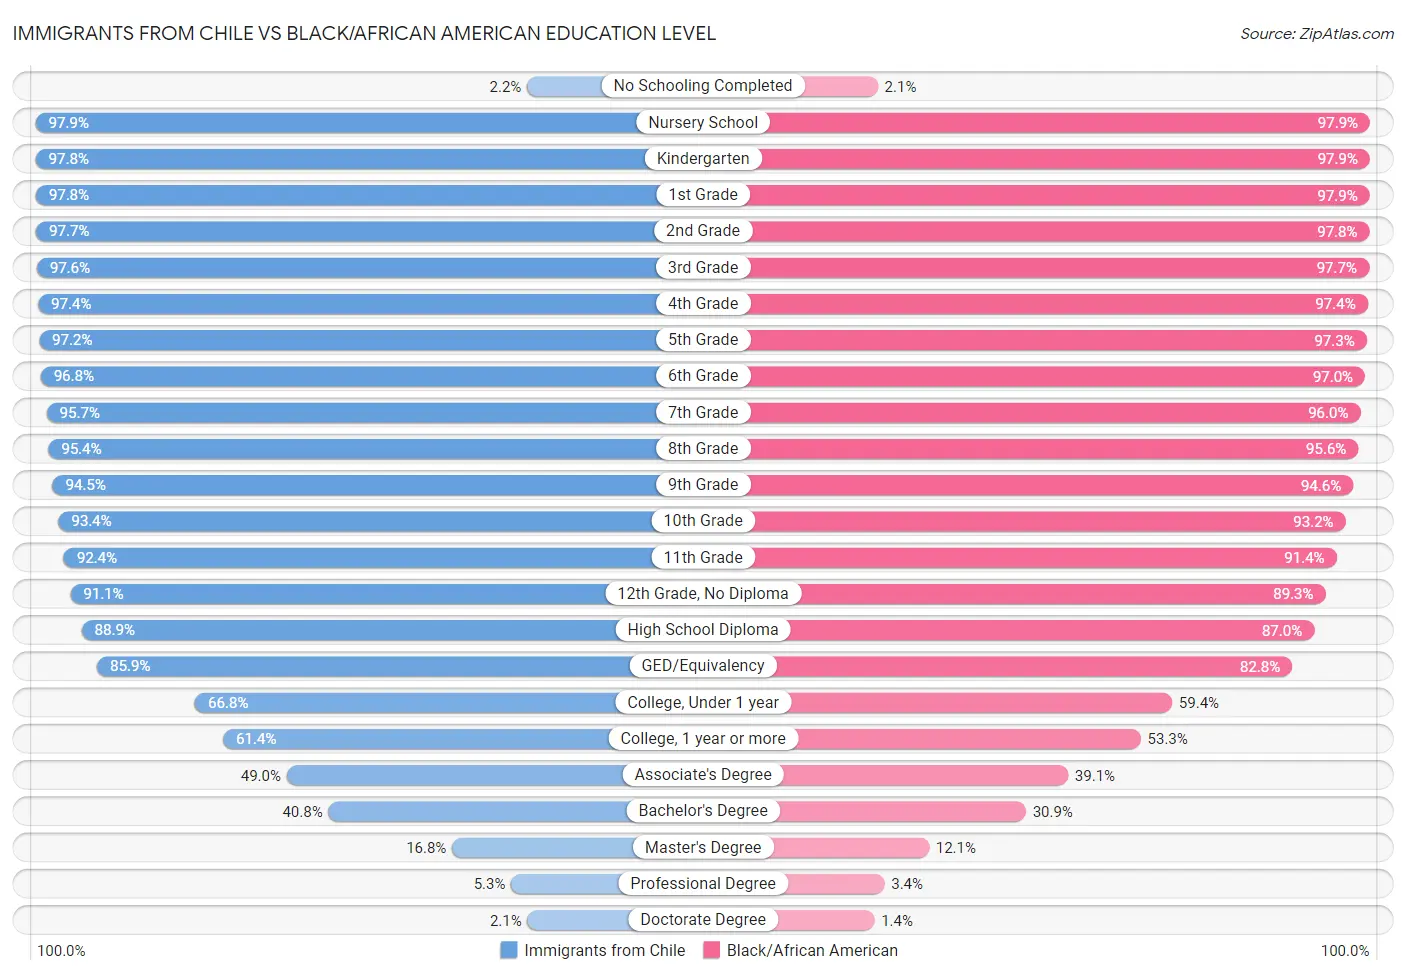 Immigrants from Chile vs Black/African American Education Level